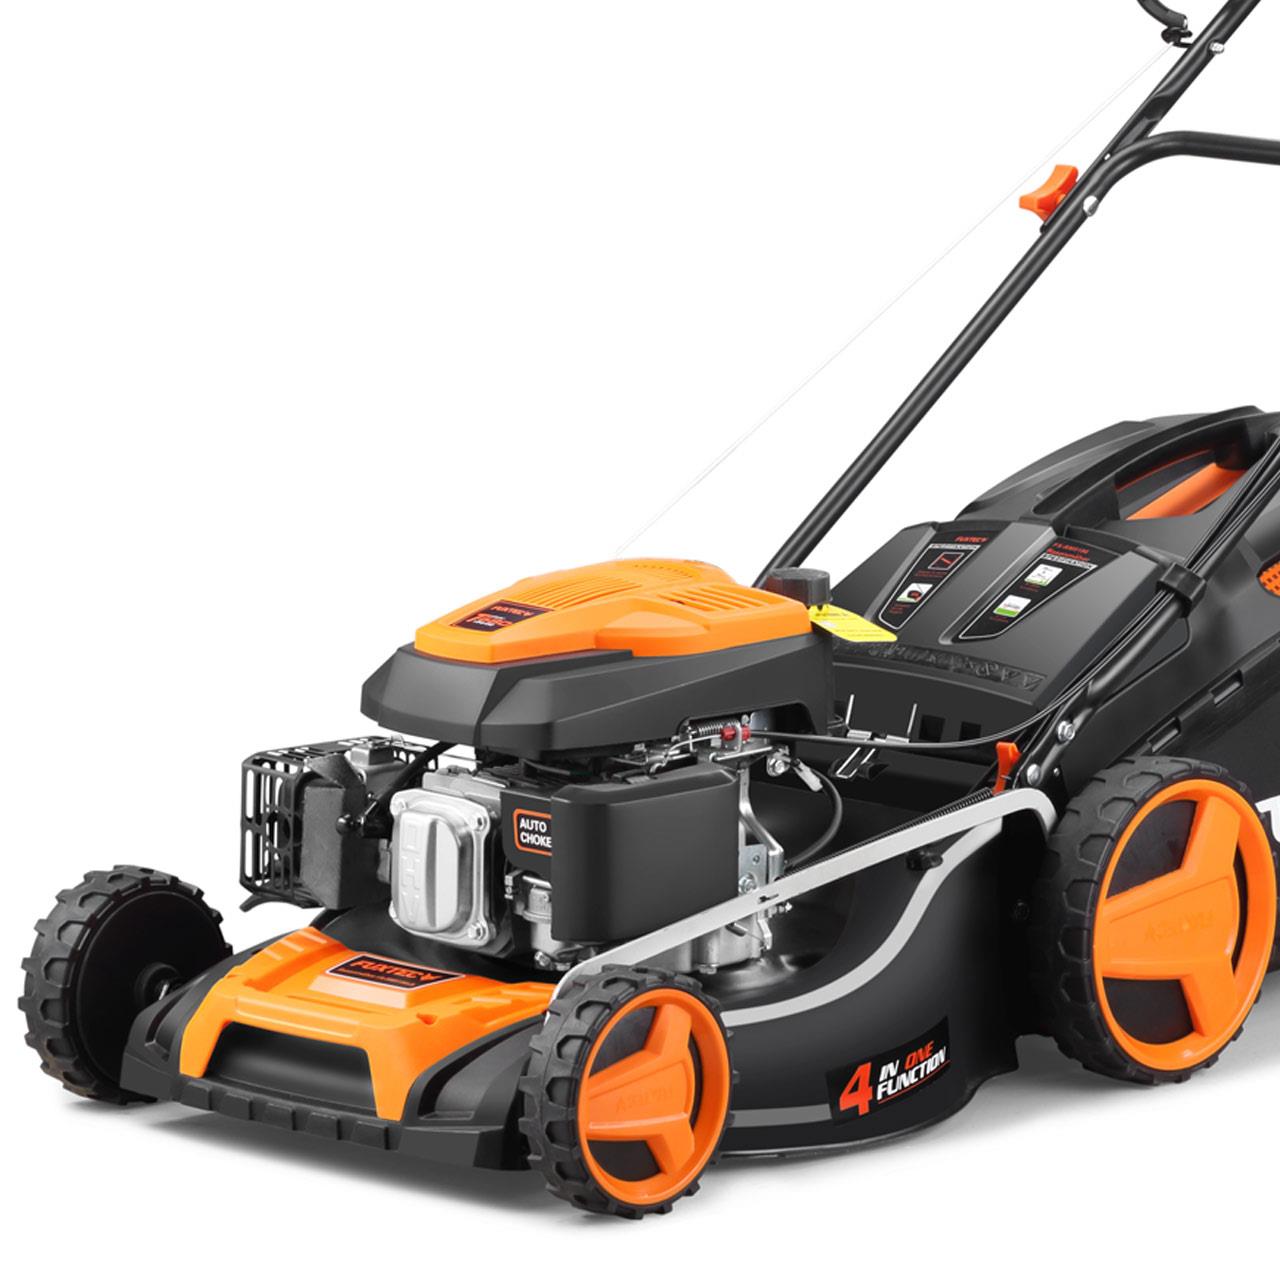 Petrol lawnmower 196cc cutting width 501mm -mowing, collecting, mulching, side discharge FUXTEC RM5196